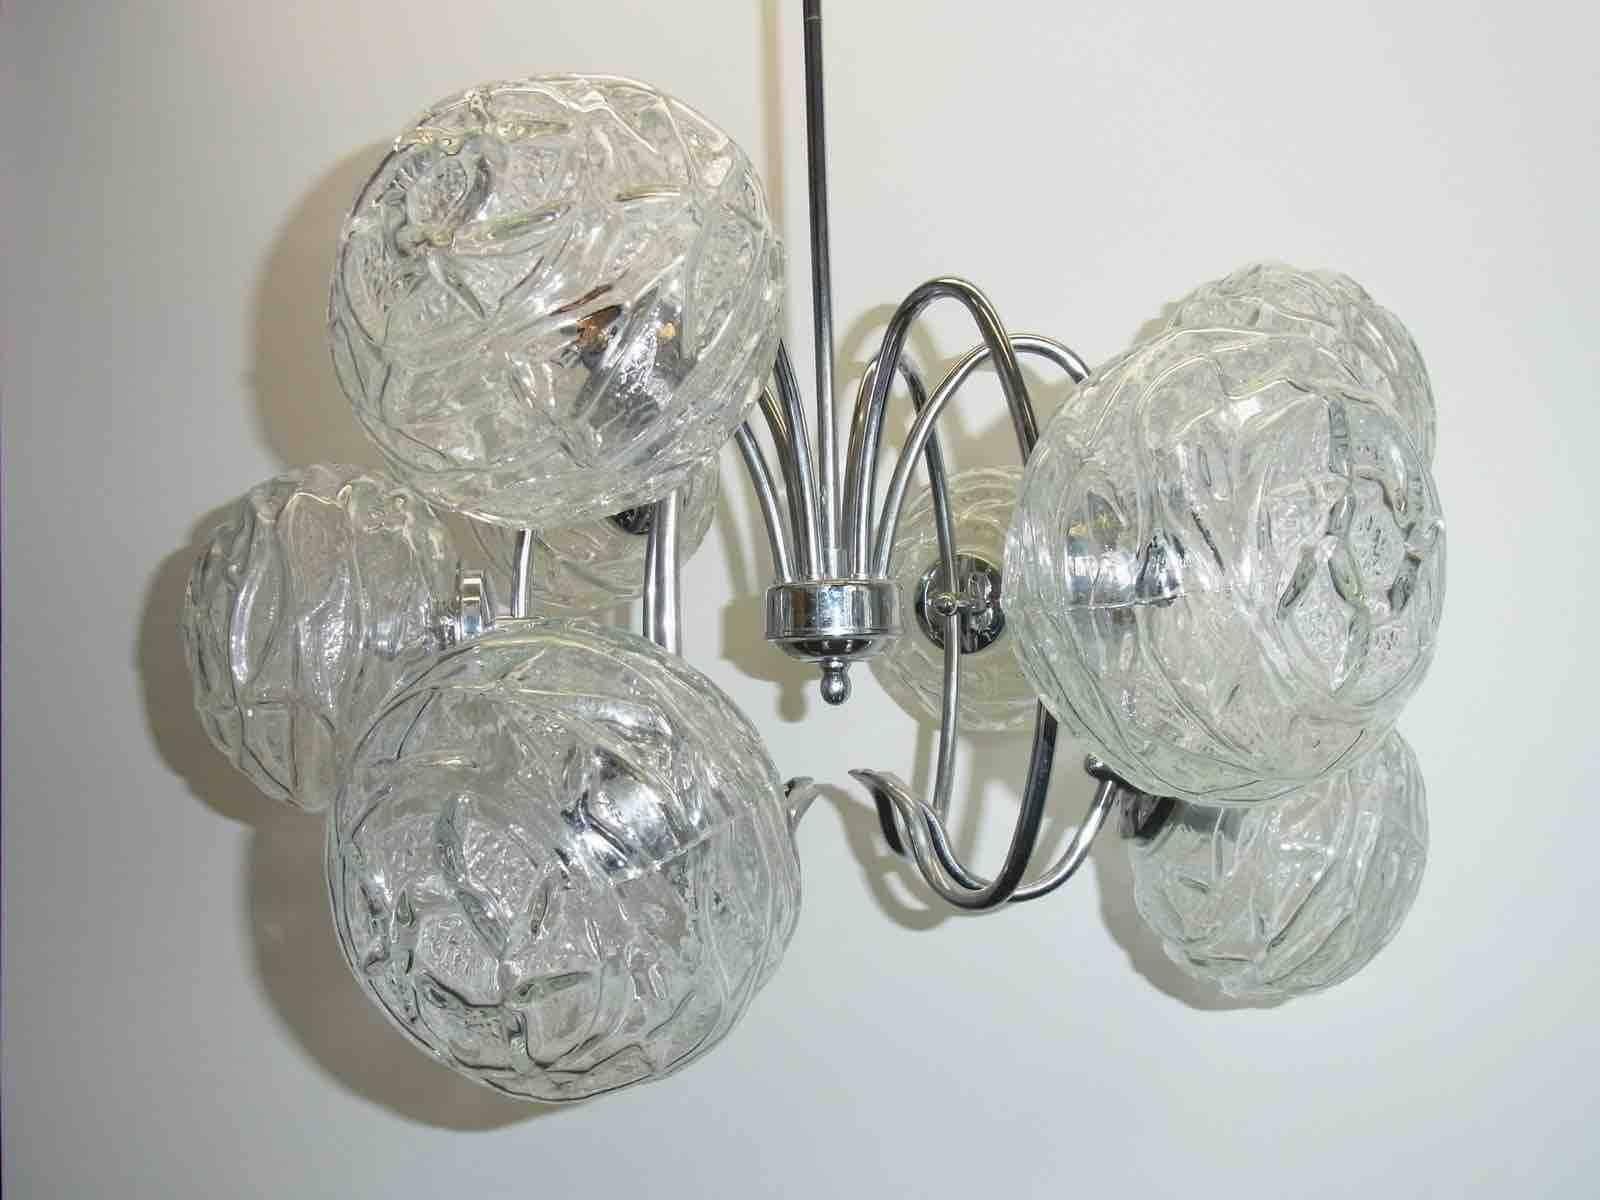 German Mid-Century Modern Polished Chrome and Glass Ball Chandelier In Good Condition For Sale In Frisco, TX